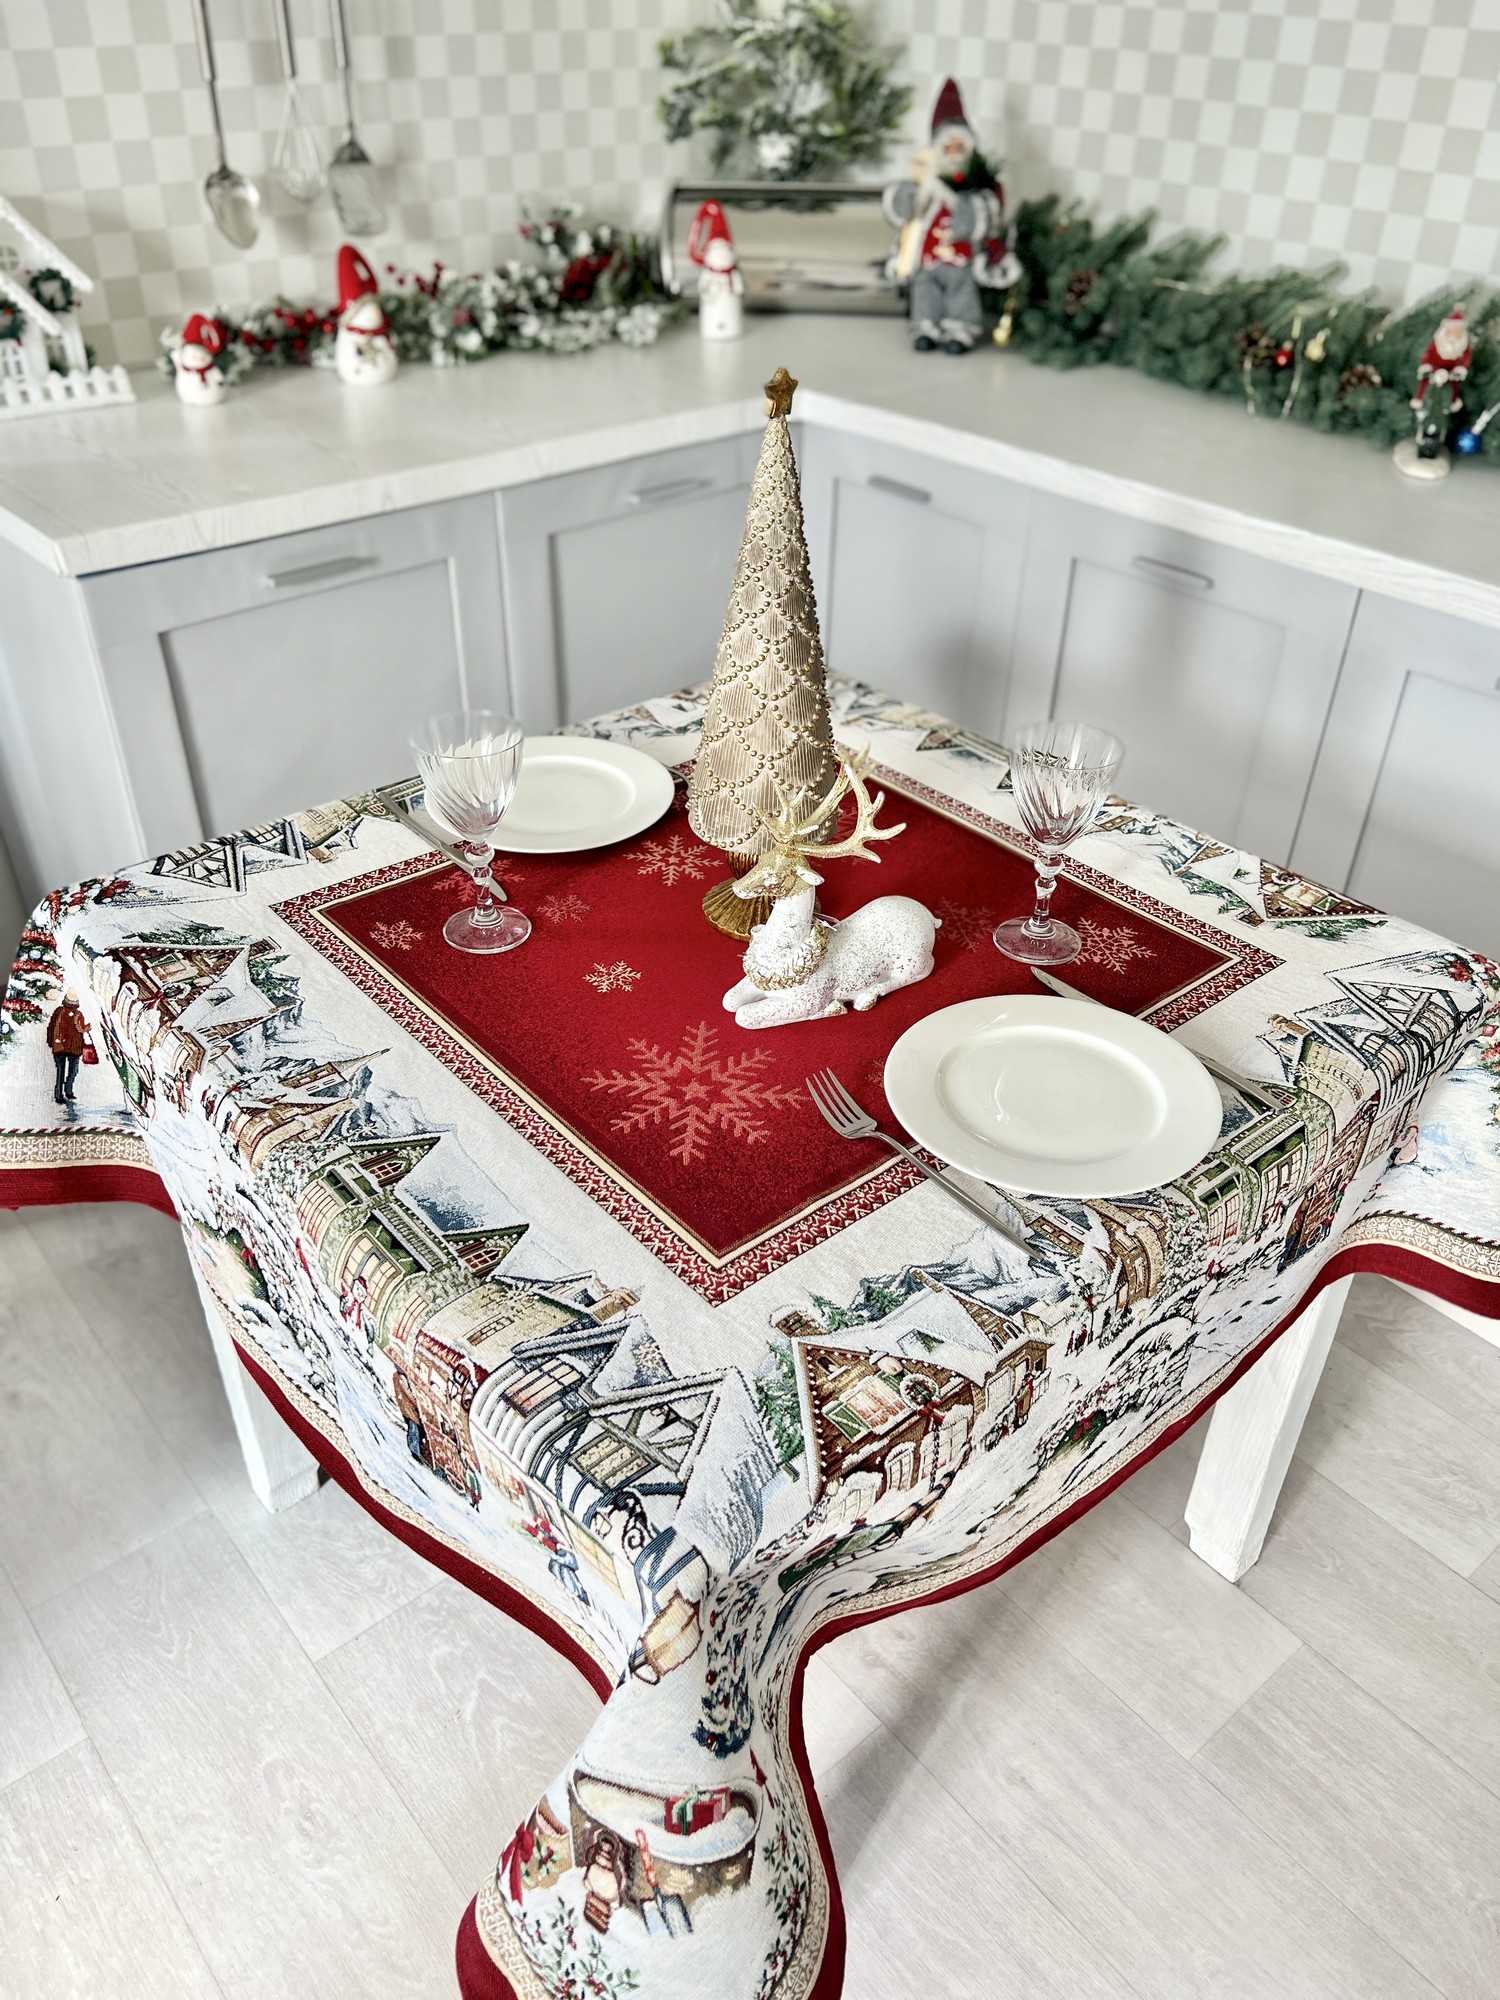 Christmas tapestry tablecloth 54x54 in (137 x 137 cm.) festive tablecloth